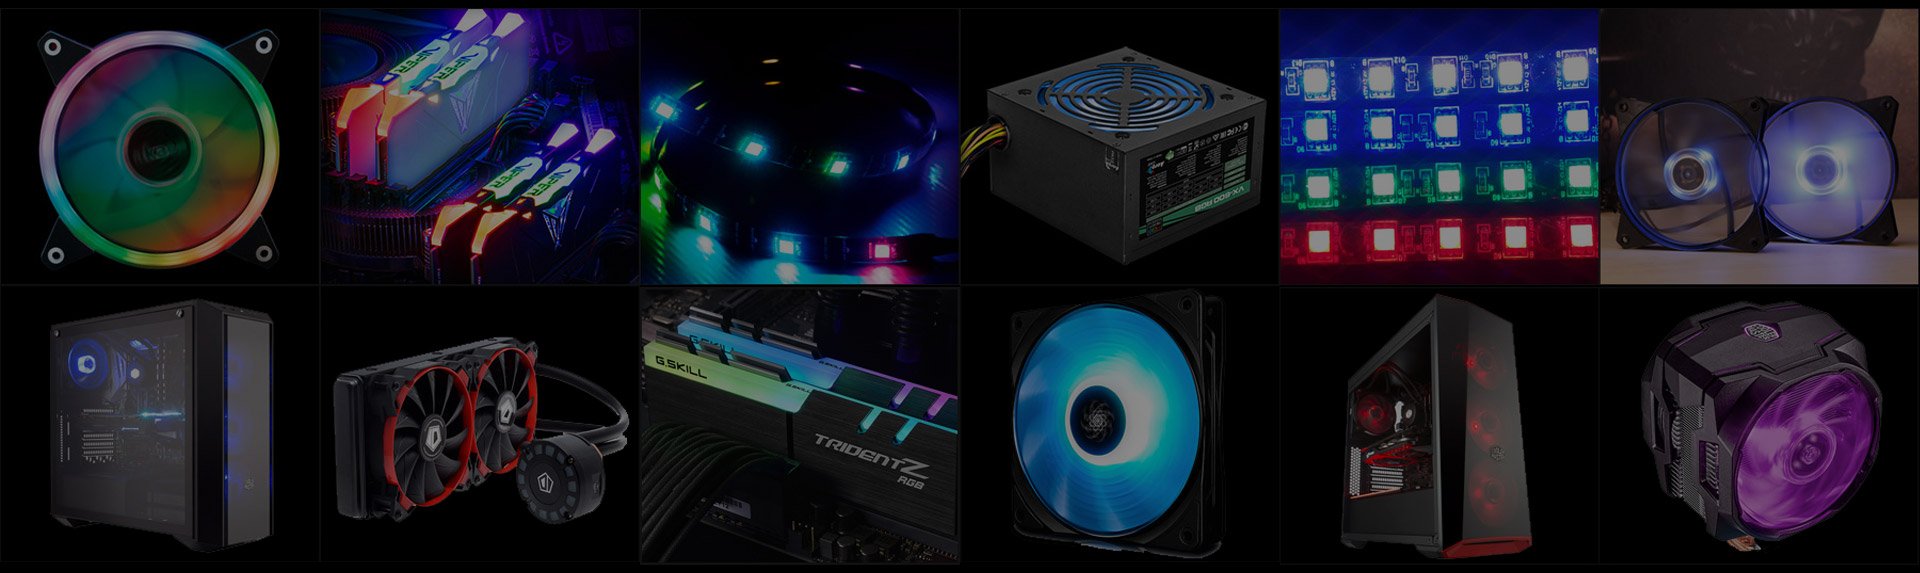 RGB Devices That Include Case Fans, Memory Modules, RGB Light Strips, Power Supplies, Cases and CPU Coolers